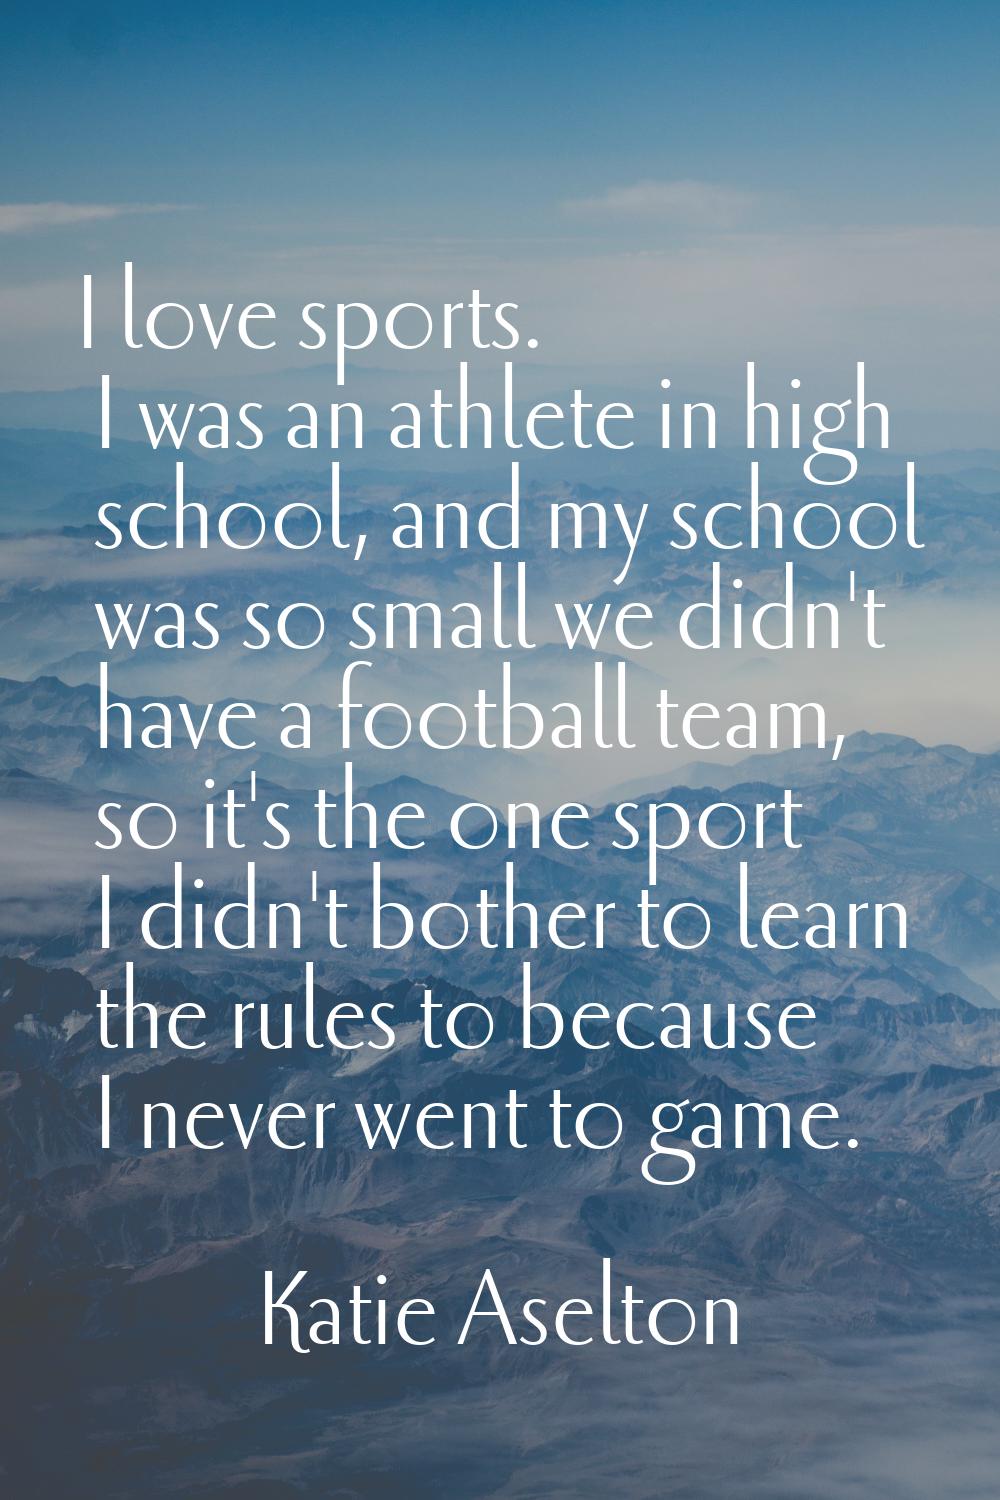 I love sports. I was an athlete in high school, and my school was so small we didn't have a footbal